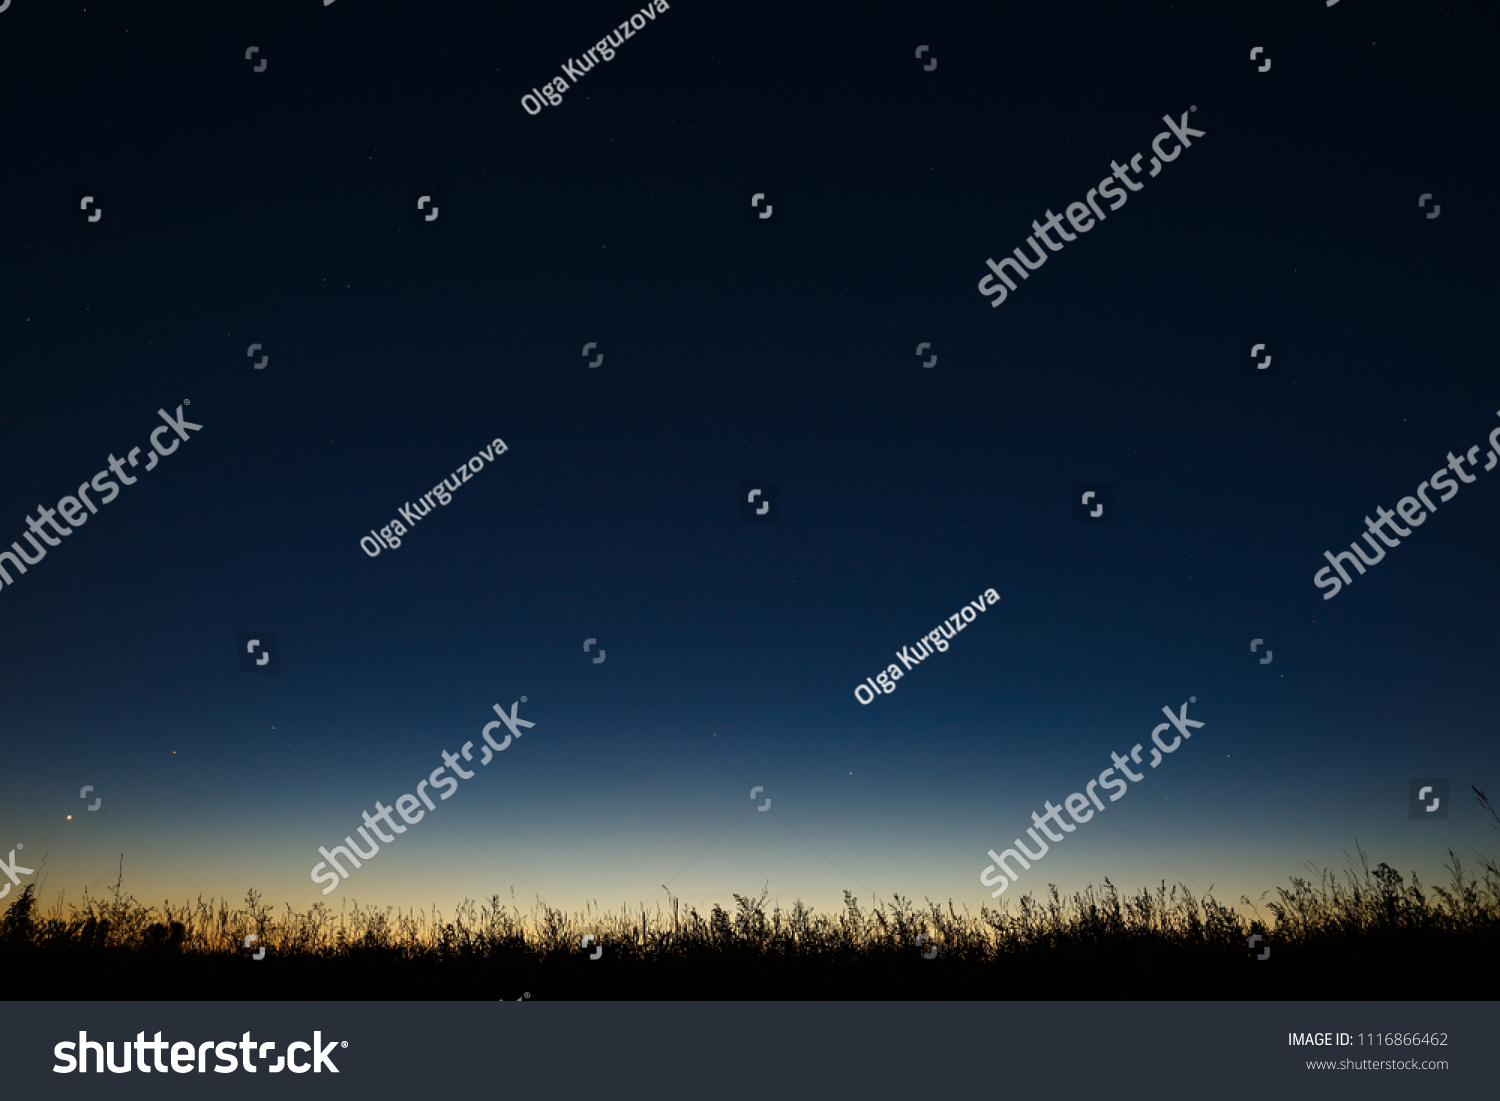 Stars in the night sky. A view of outer space at dusk. #1116866462